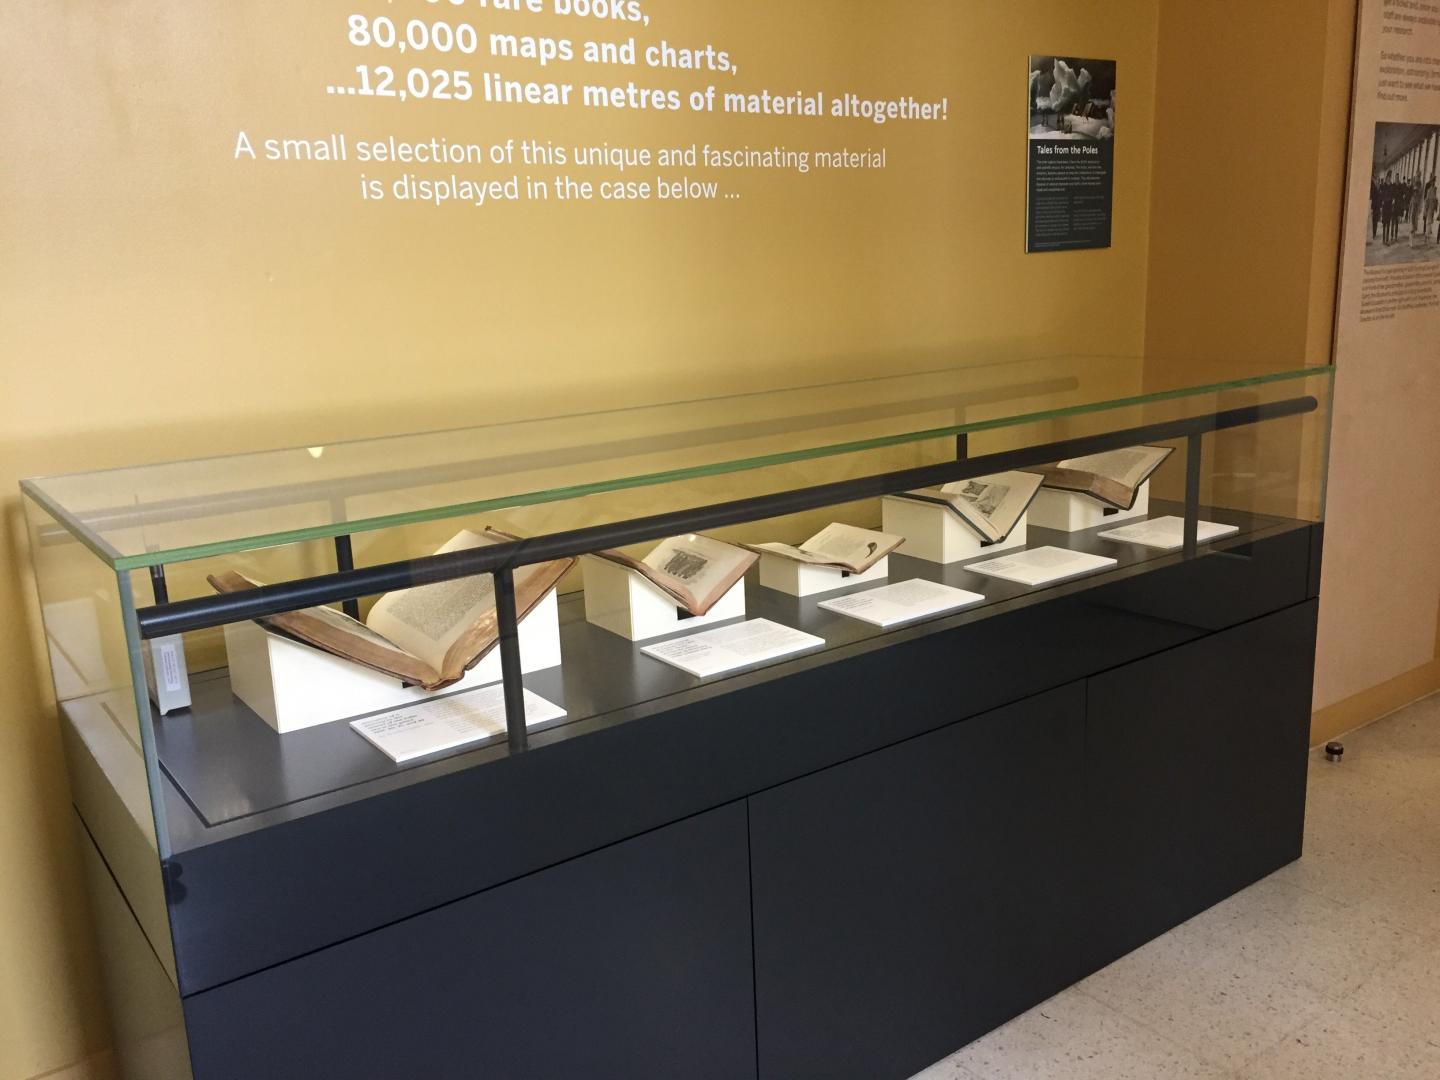 The Caird Library display case